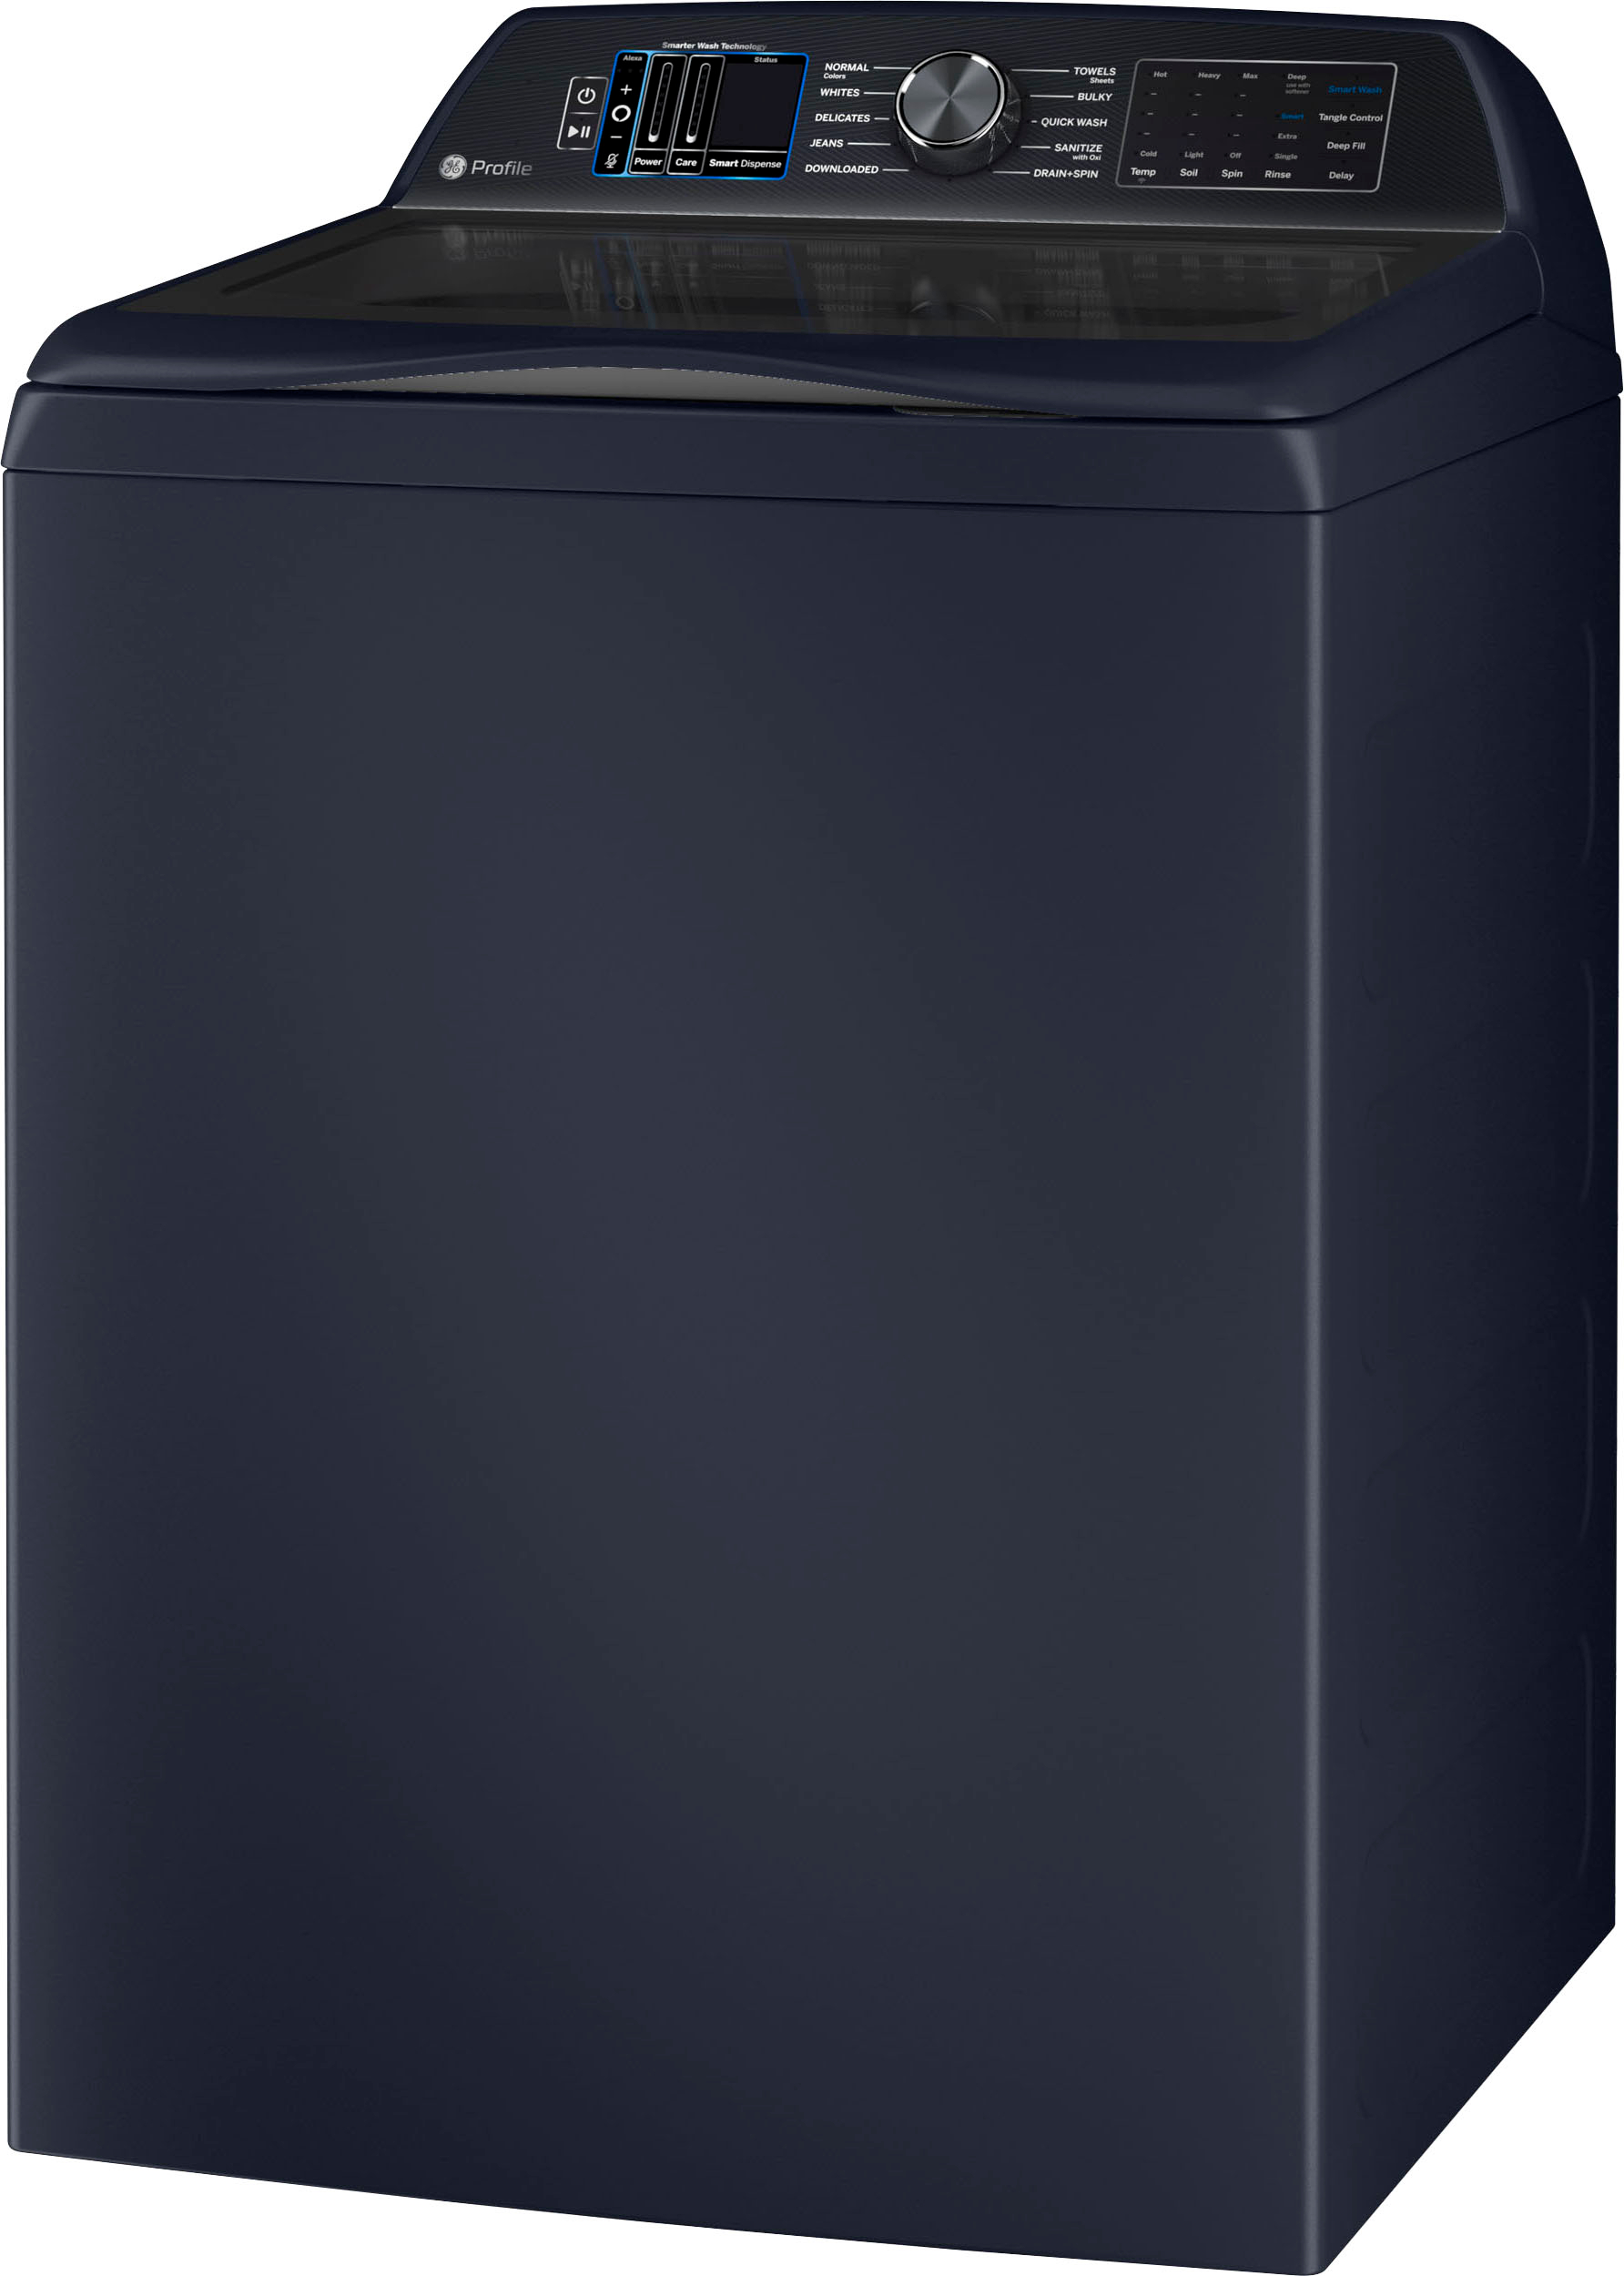 Left View: Samsung - 5.0 cu. ft. Large Capacity Top Load Washer with Deep Fill and EZ Access Tub - Black